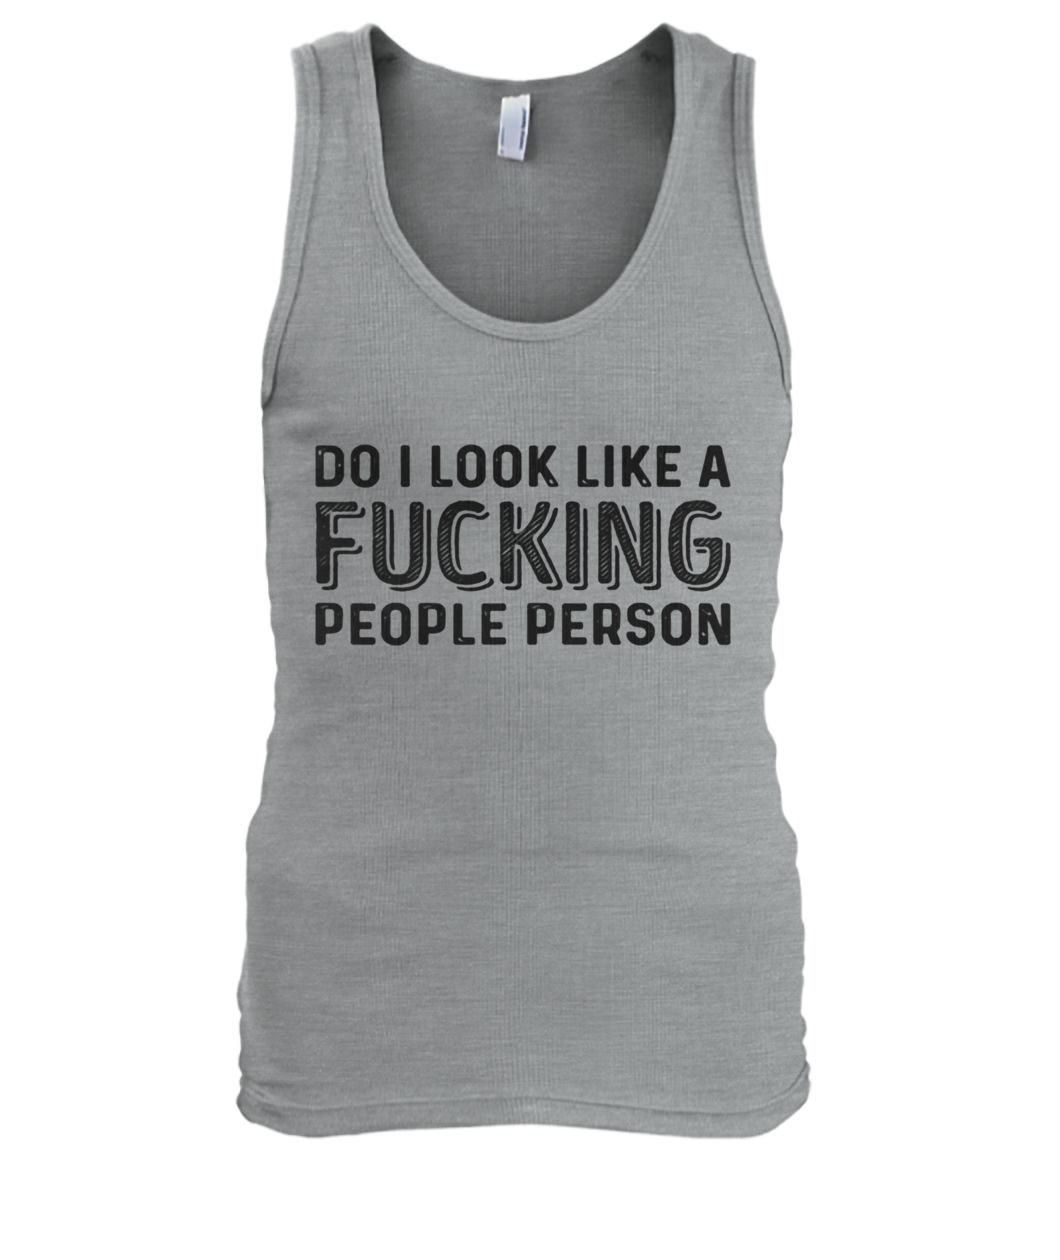 Do I look like a fucking people person men's tank top